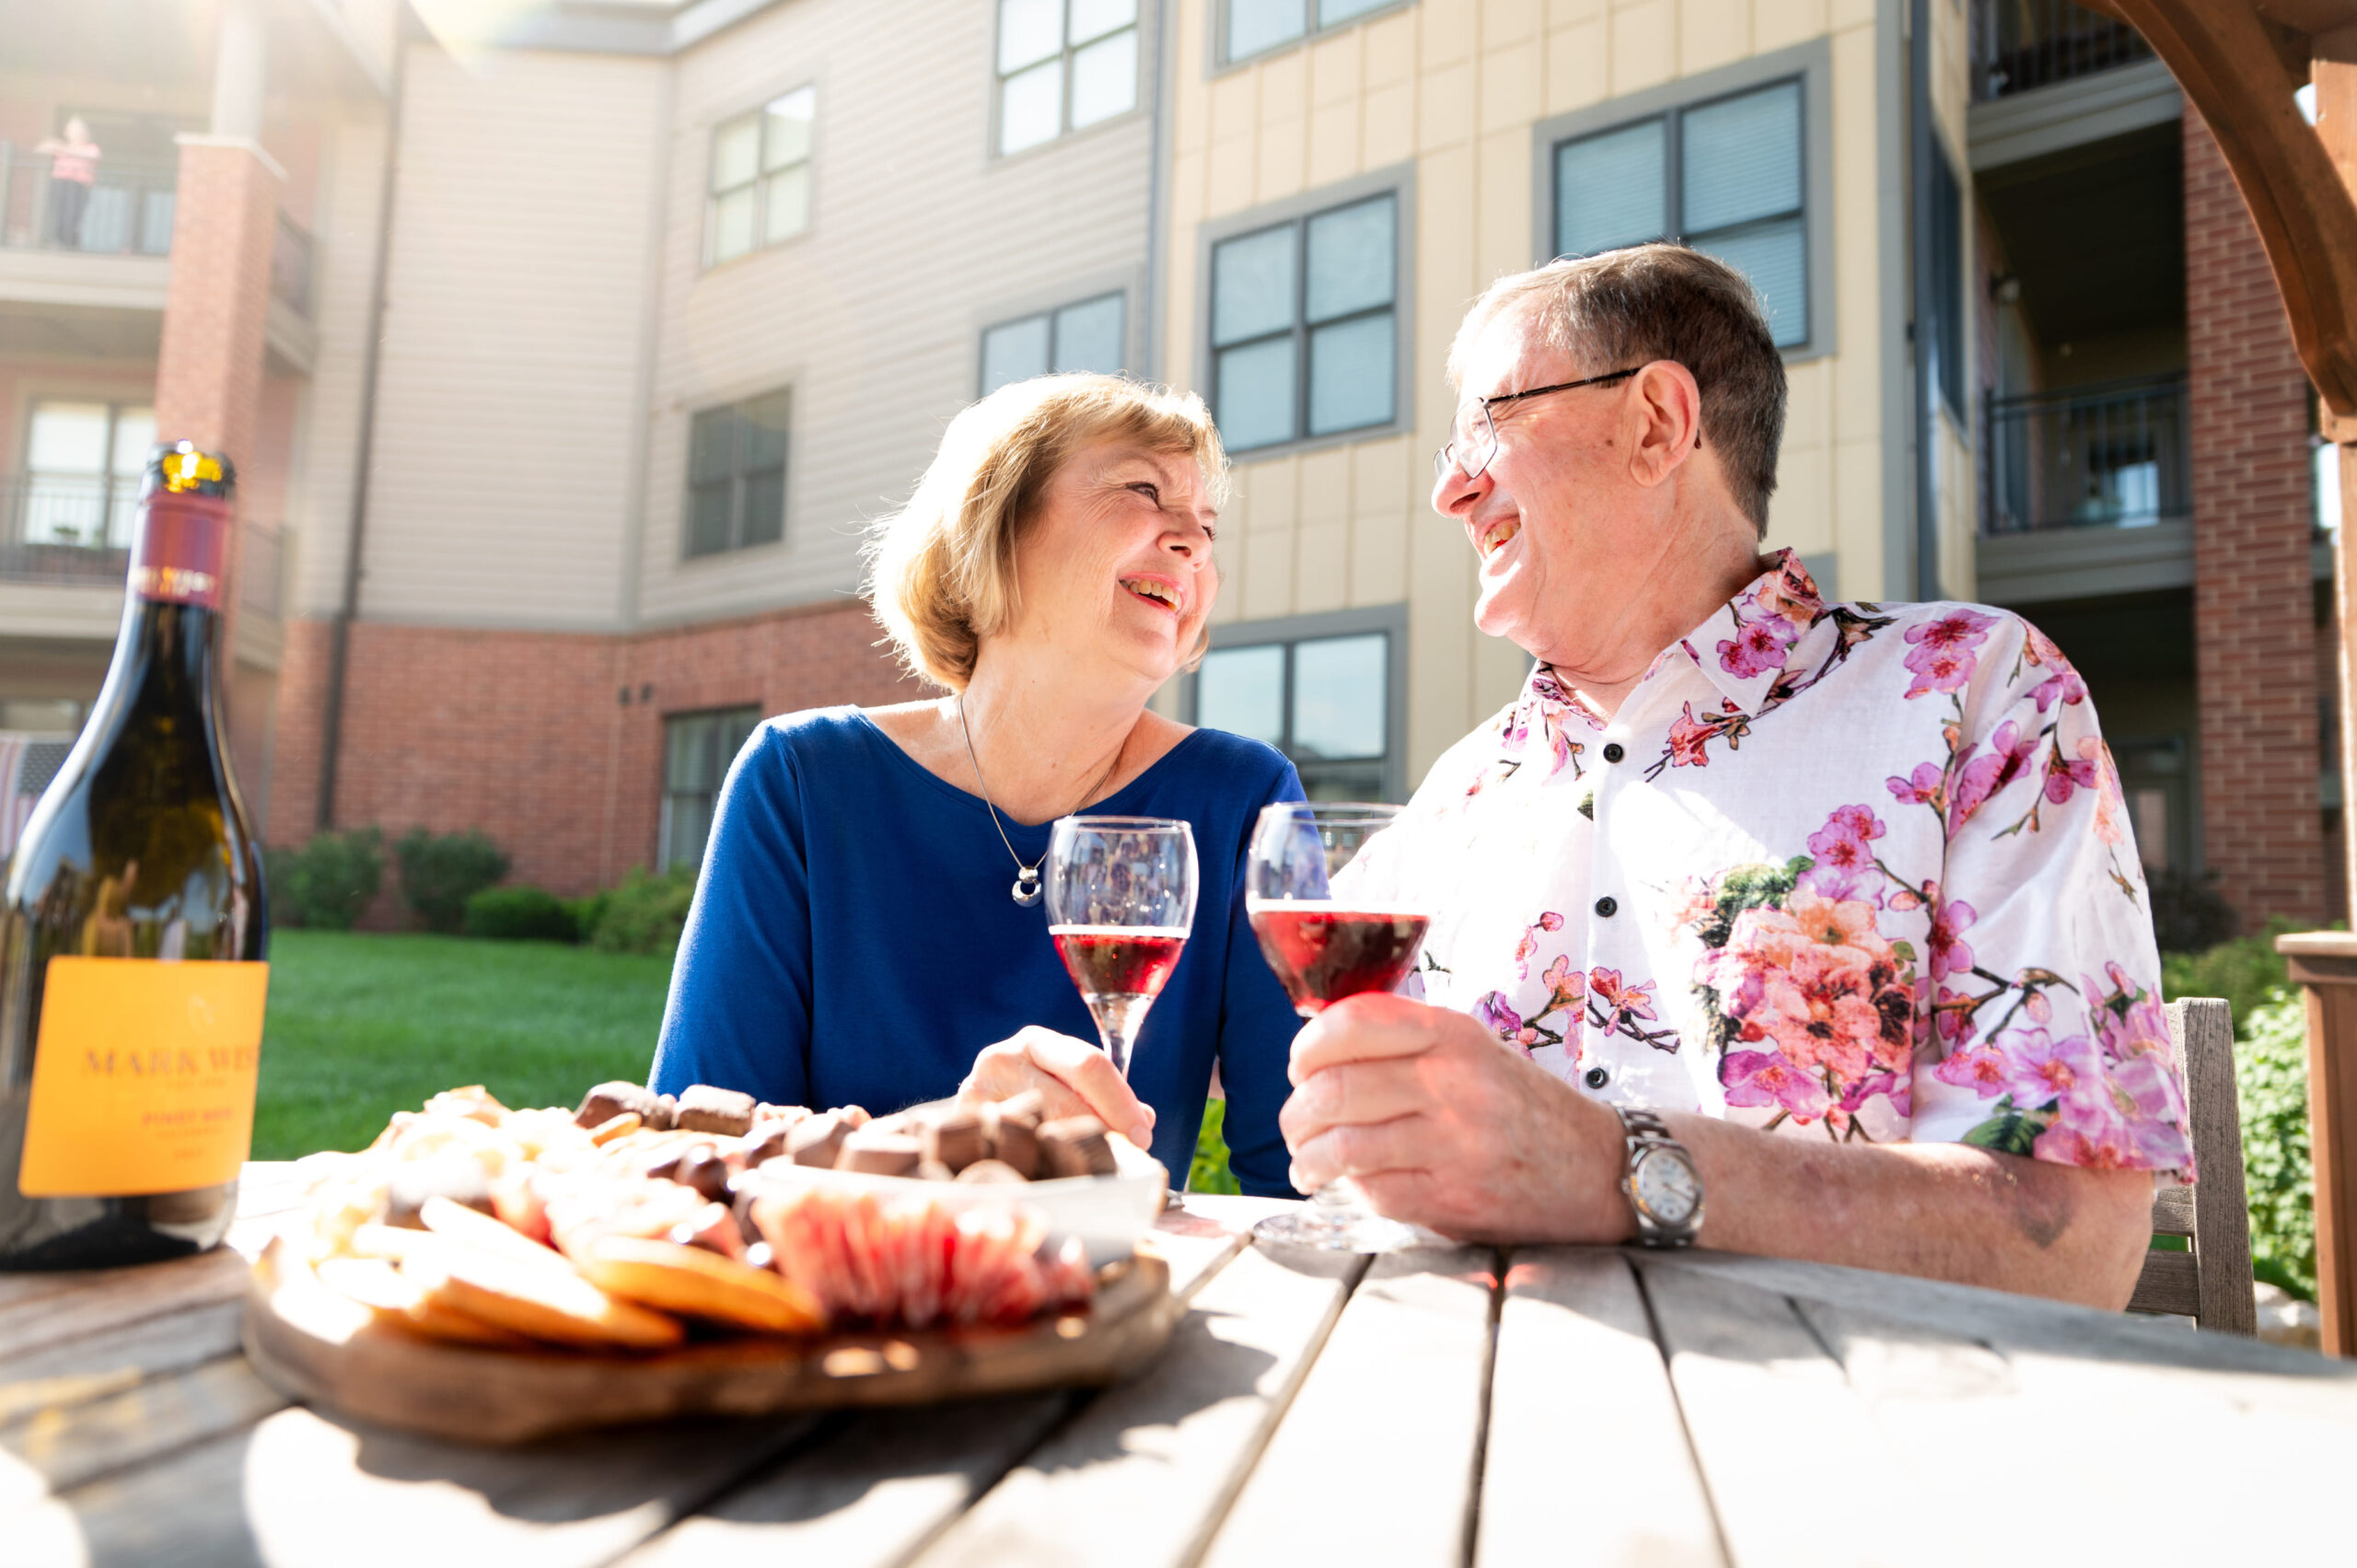 Two community members enjoy glasses of wine and charcuterie in the sunshine.